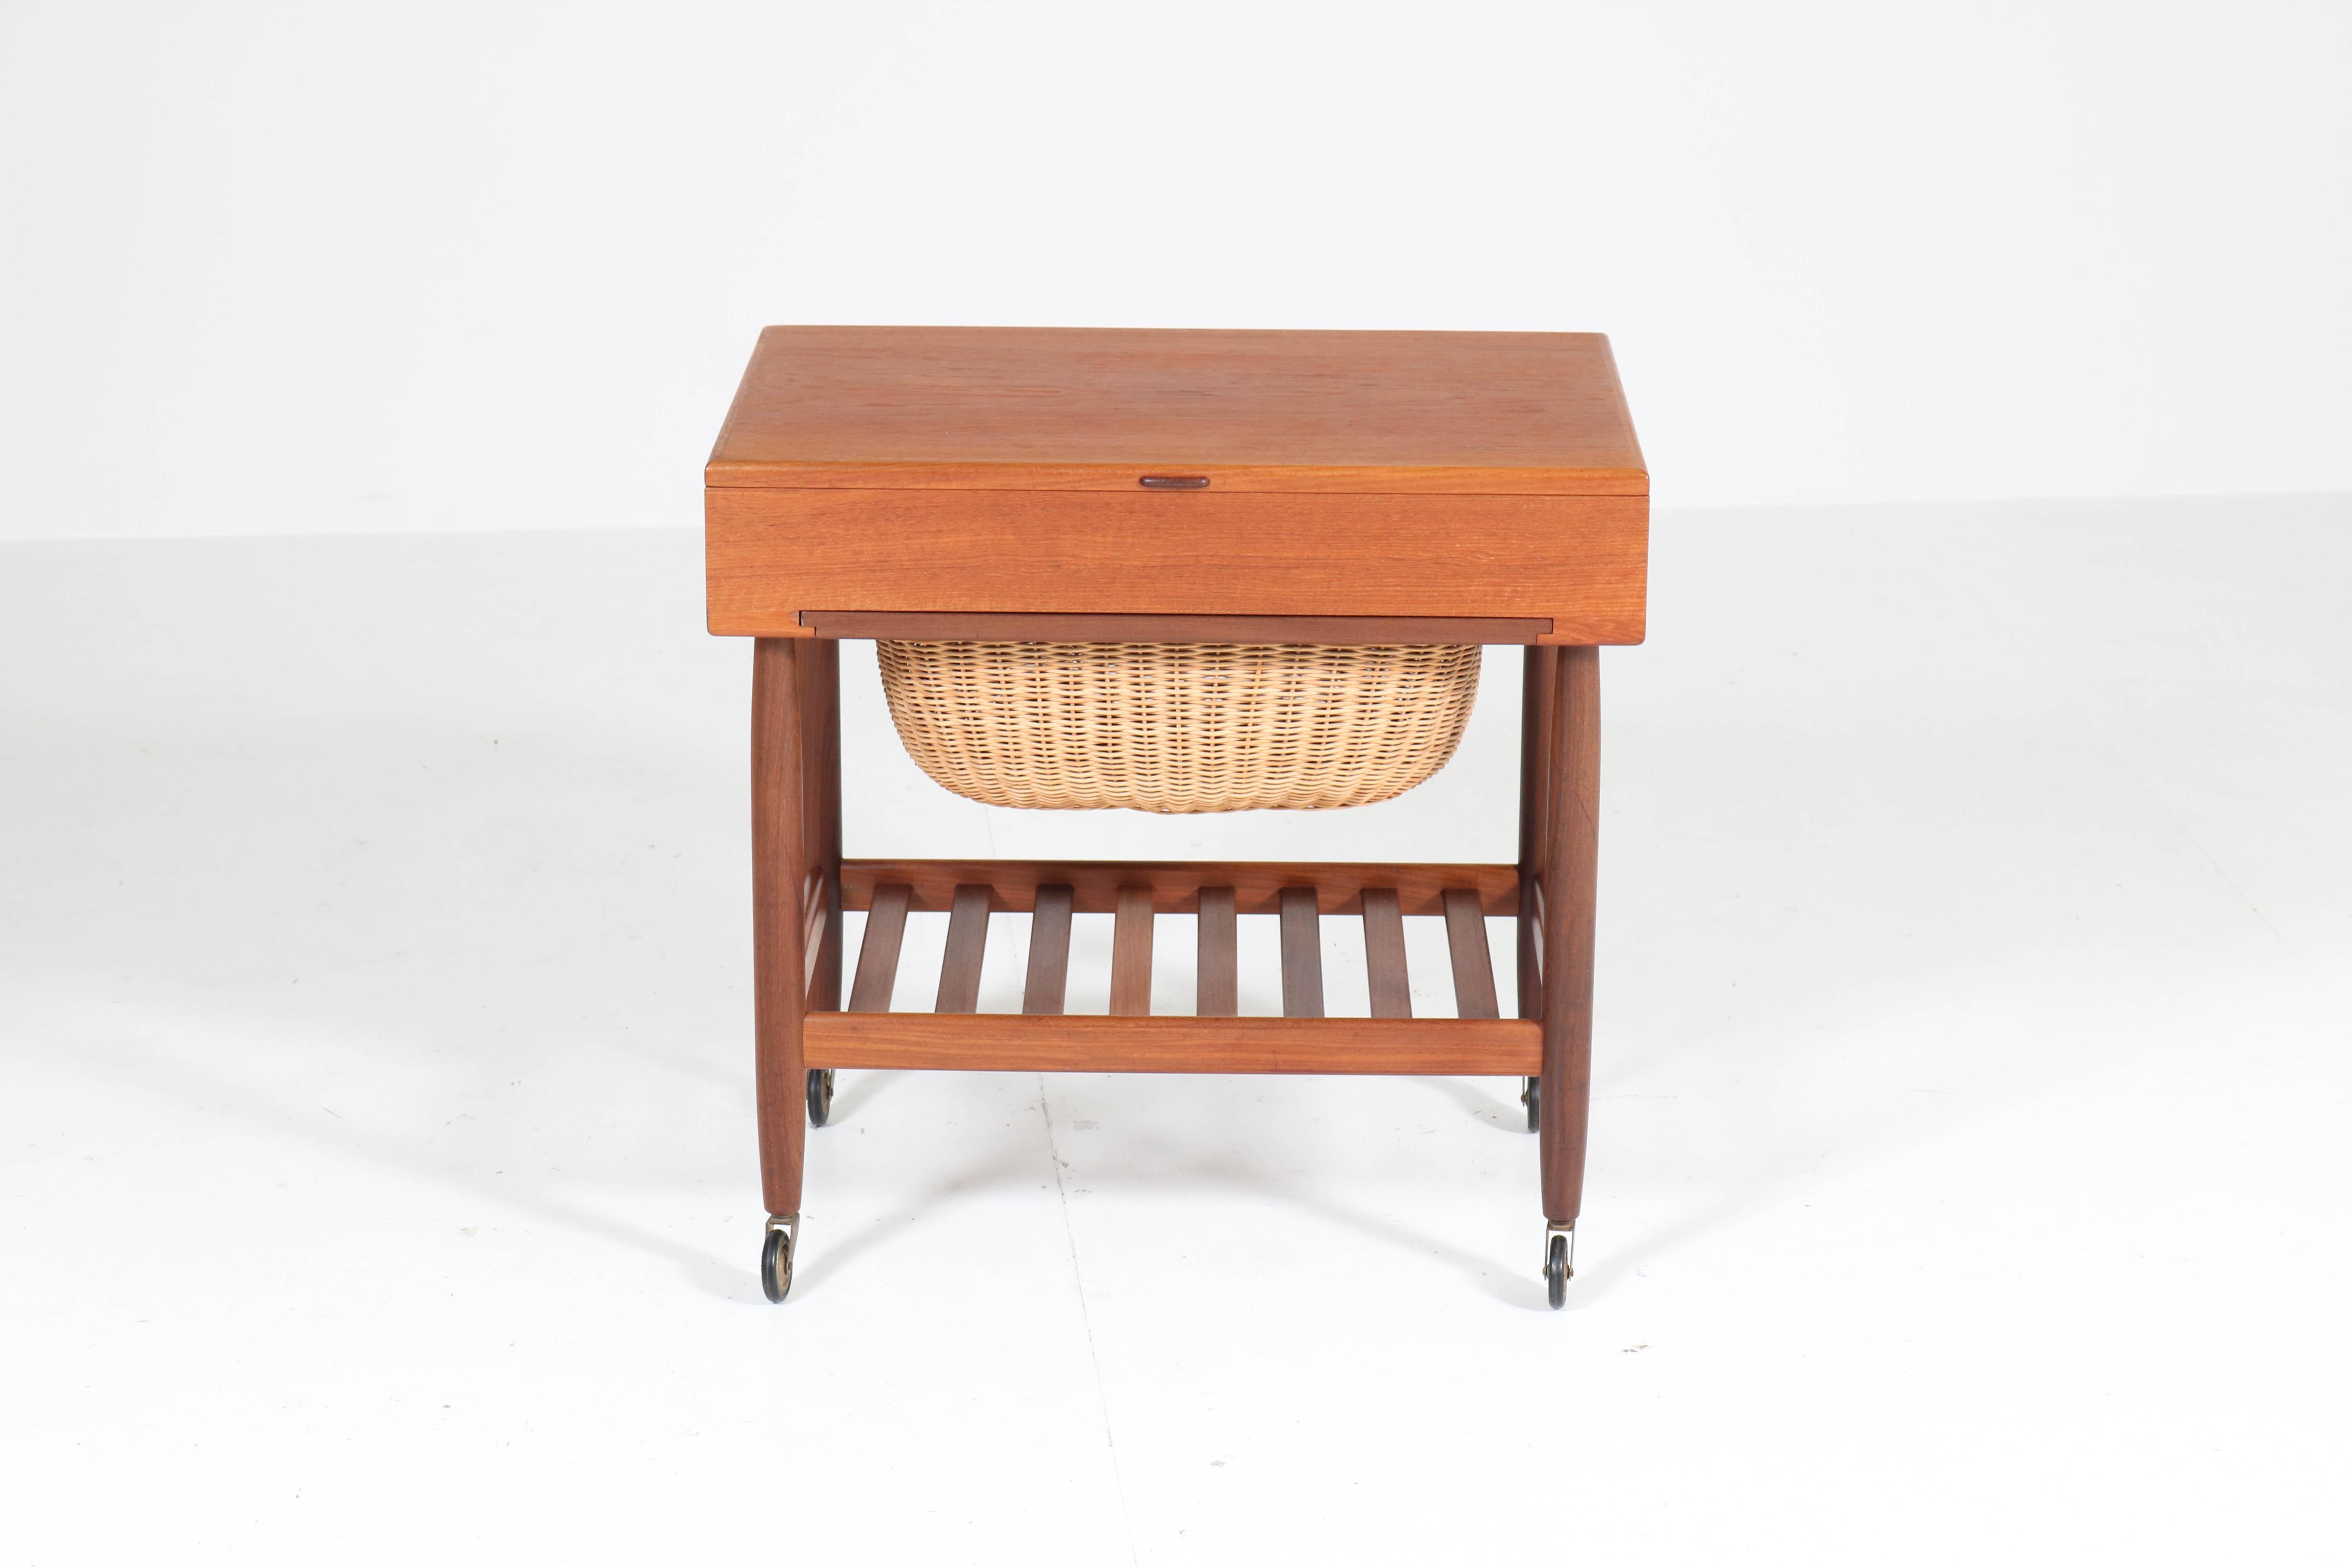 Stunning Mid-Century Modern sewing trolley.
Design by Ejvind Johansson for FDB Mobler.
Striking Danish design from the sixties.
Solid teak with original wicker basket.
Marked: made in Denmark,see image 12.
In very good original condition with minor